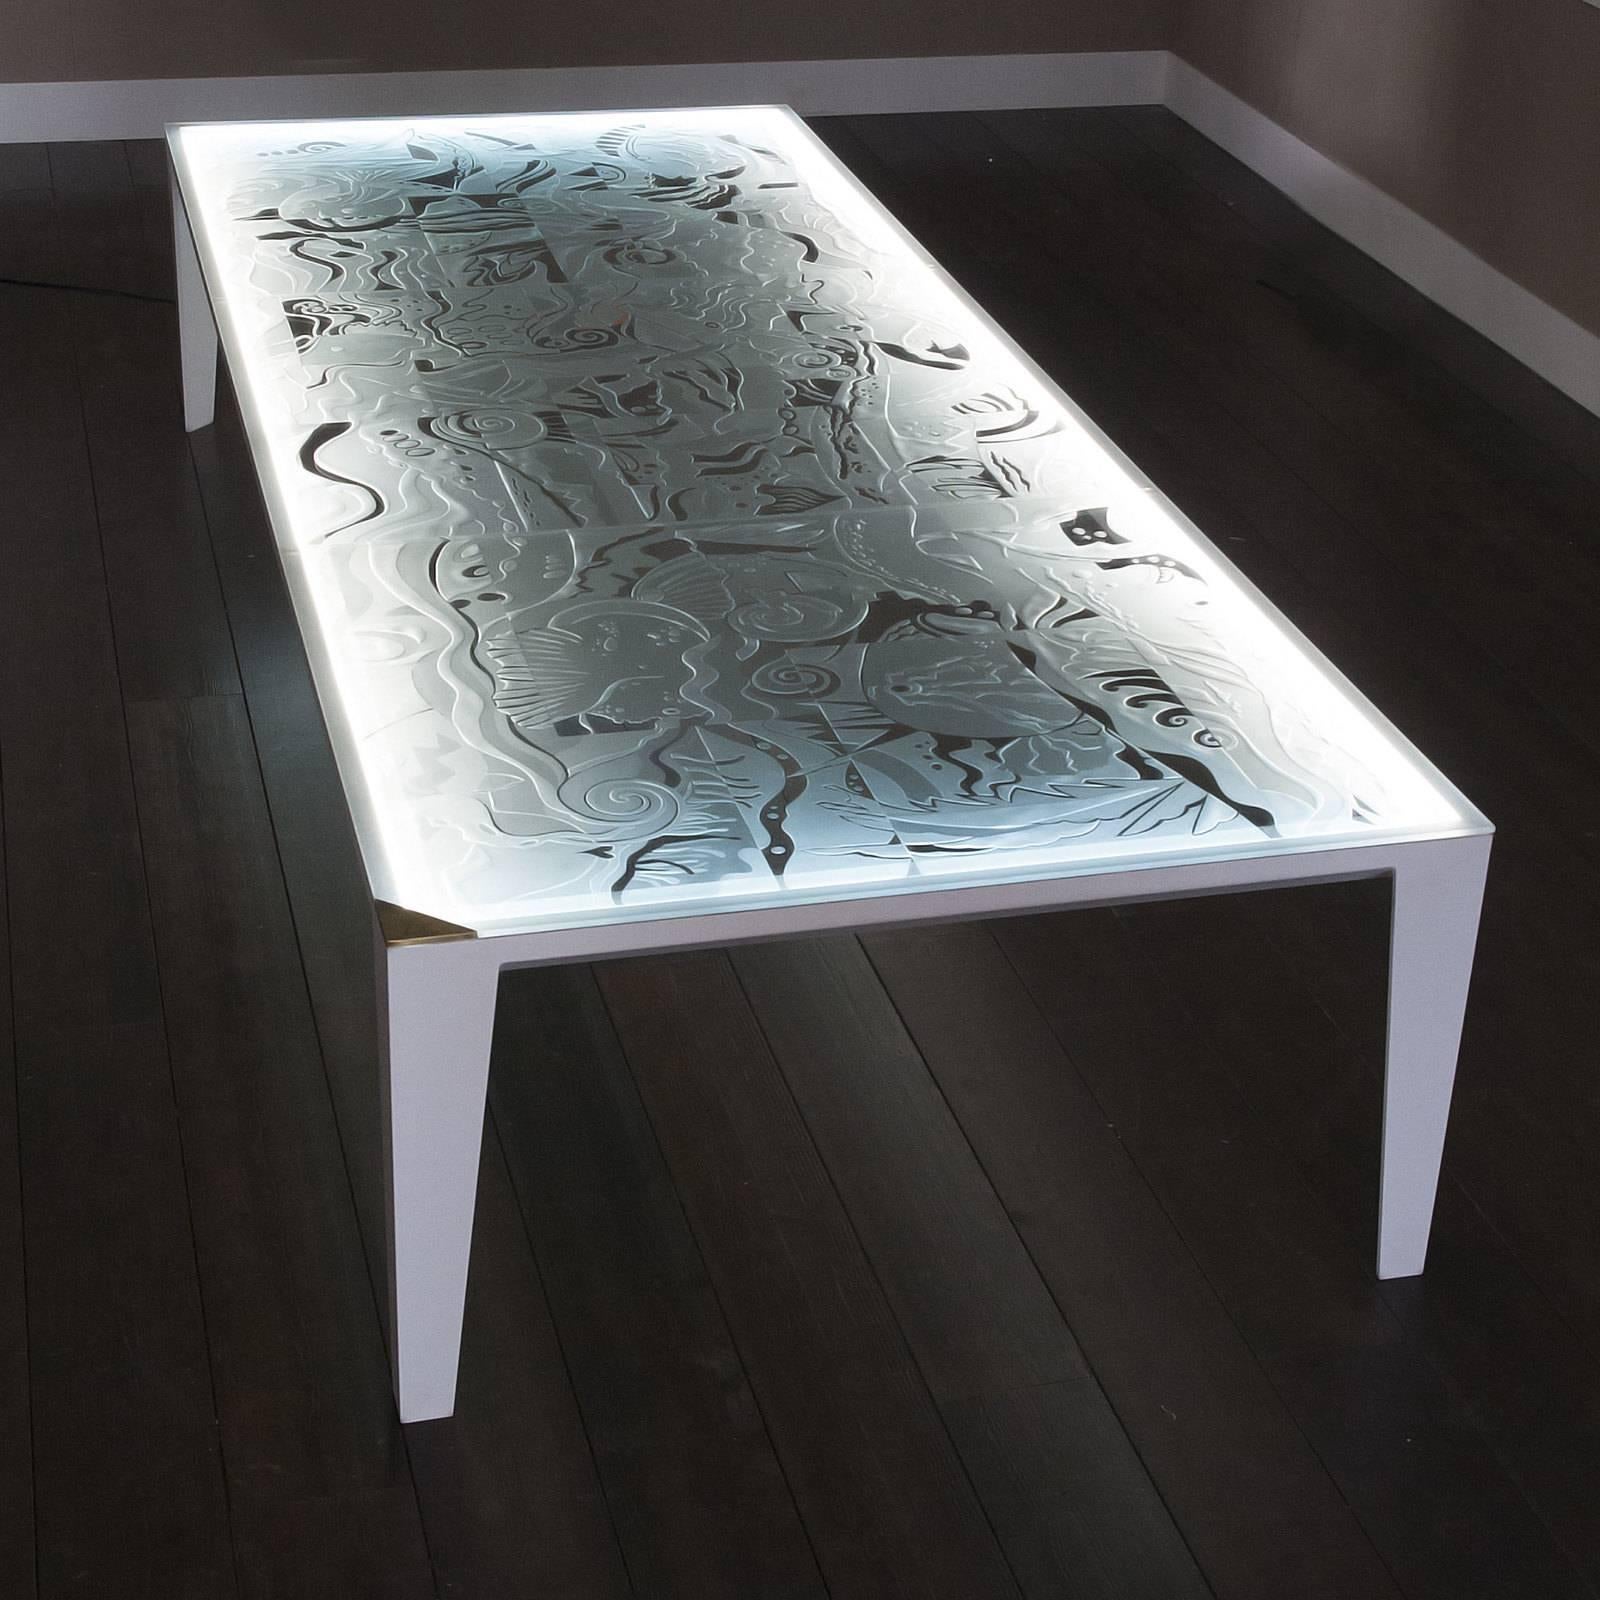 A Classic piece with an Avant Garde twist, this stunning table is a functional work of art. The distinctive glass top features a hand-engraved, bas-relief design with sinuous marine motifs enhanced by the embedded LED system. The combination of